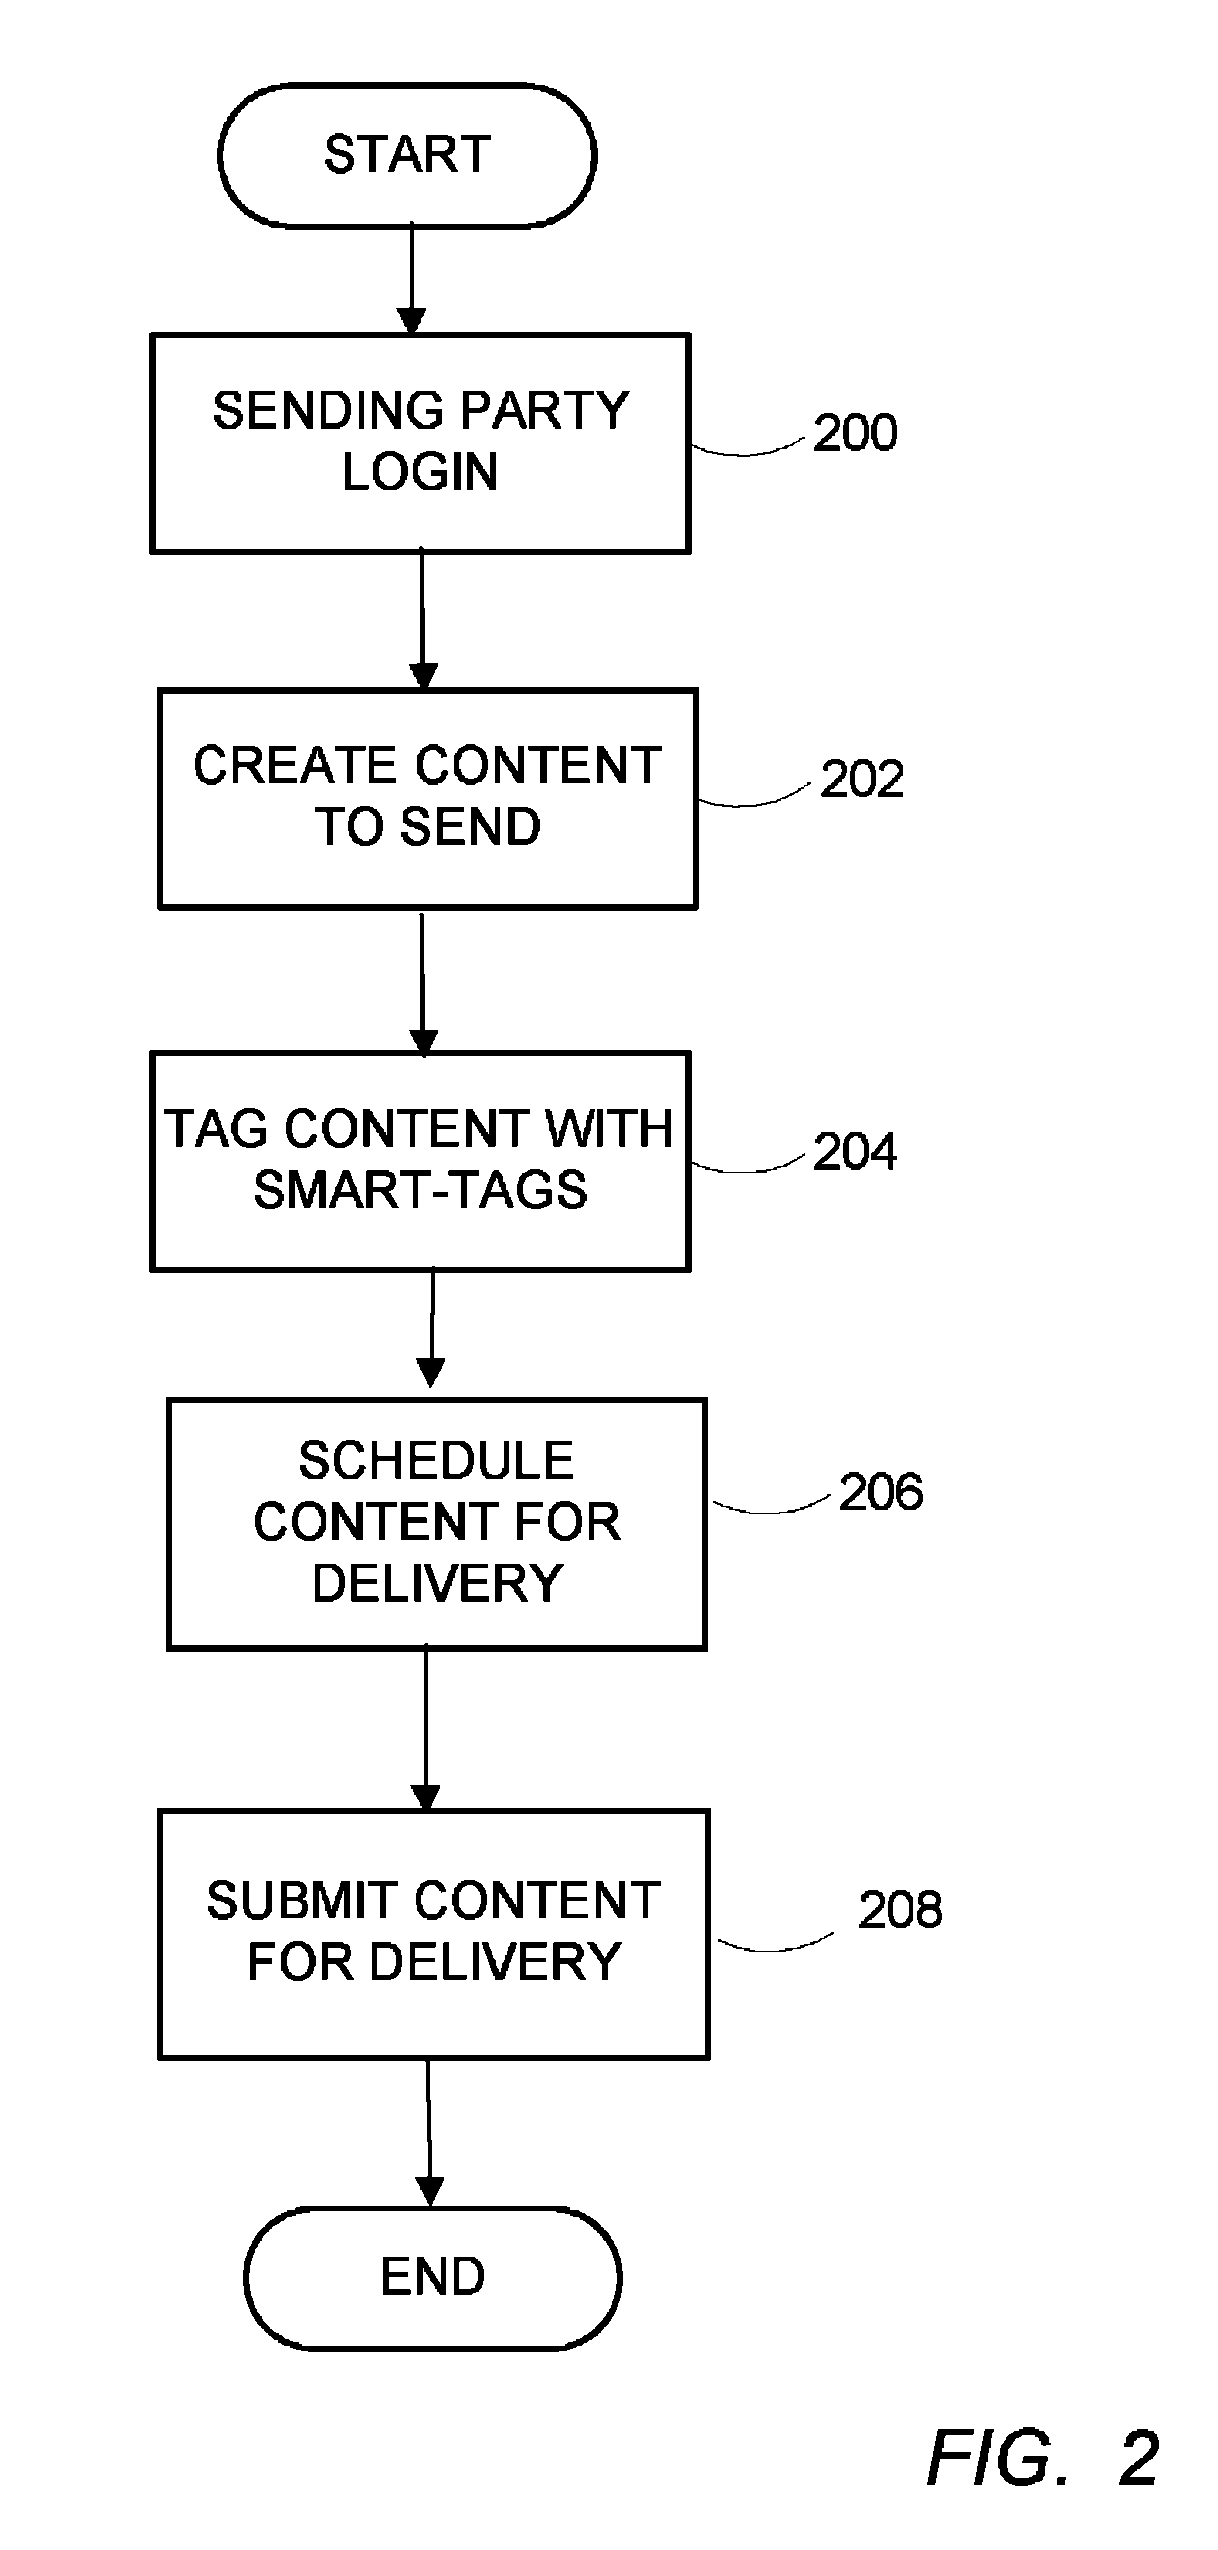 Customizable, smart-tag based content delivery and notification system, program, and method for connecting entities on the world wide web